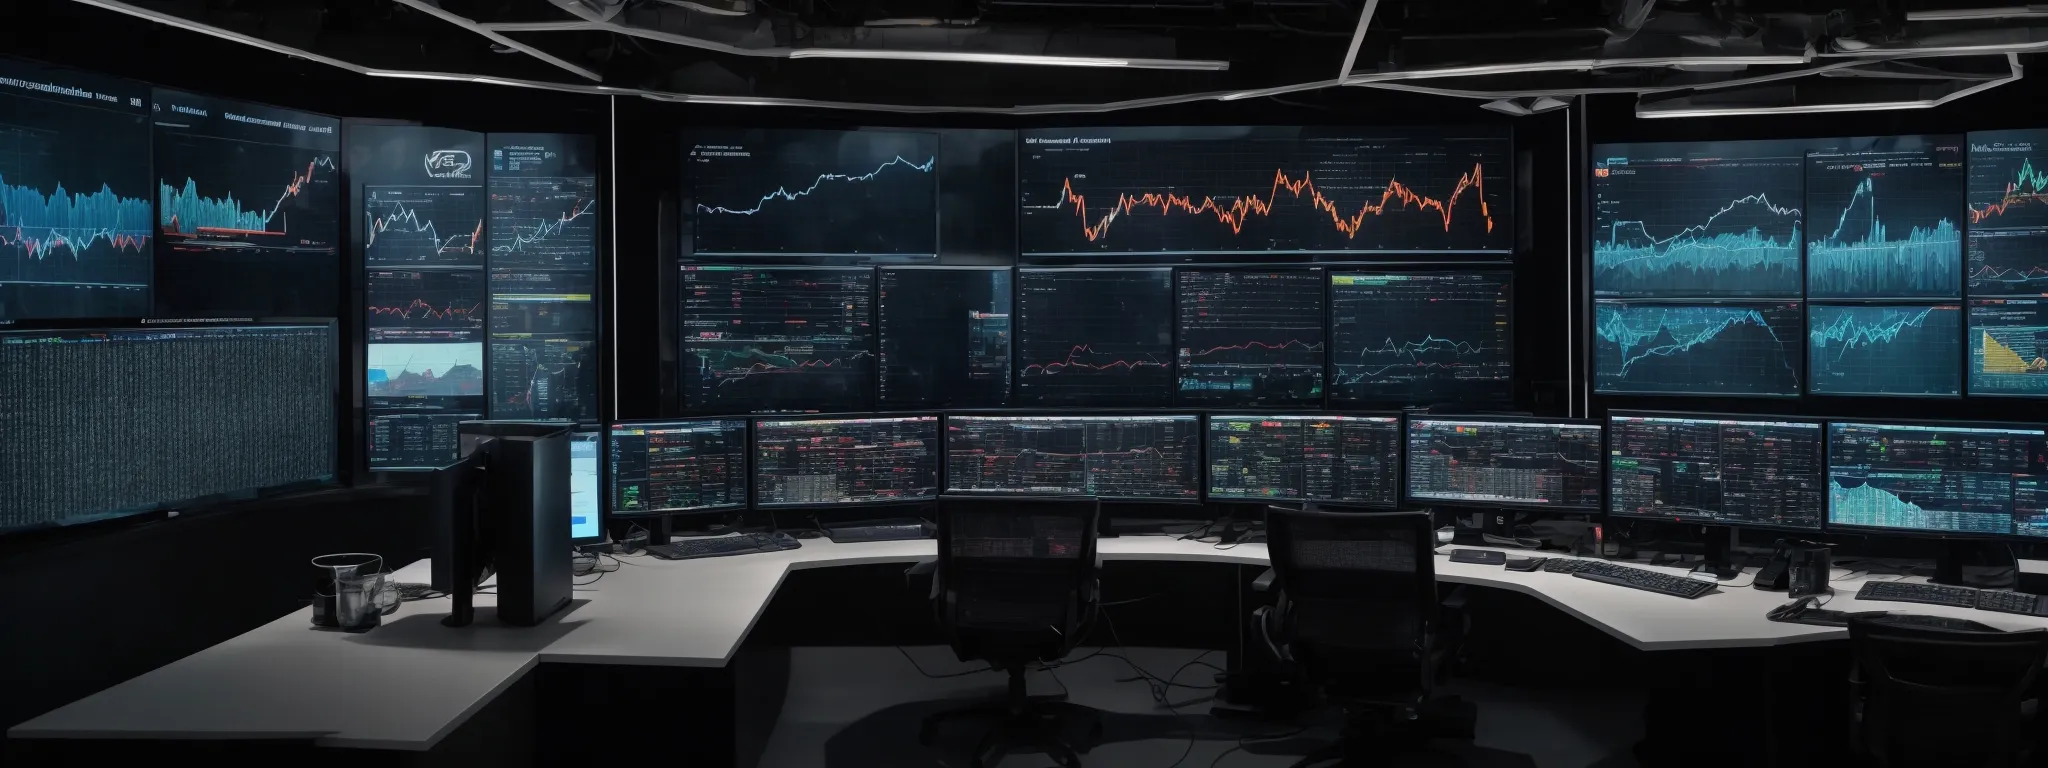 a command center with multiple screens displaying graphs and analytics, representing an integrated digital marketing hub.